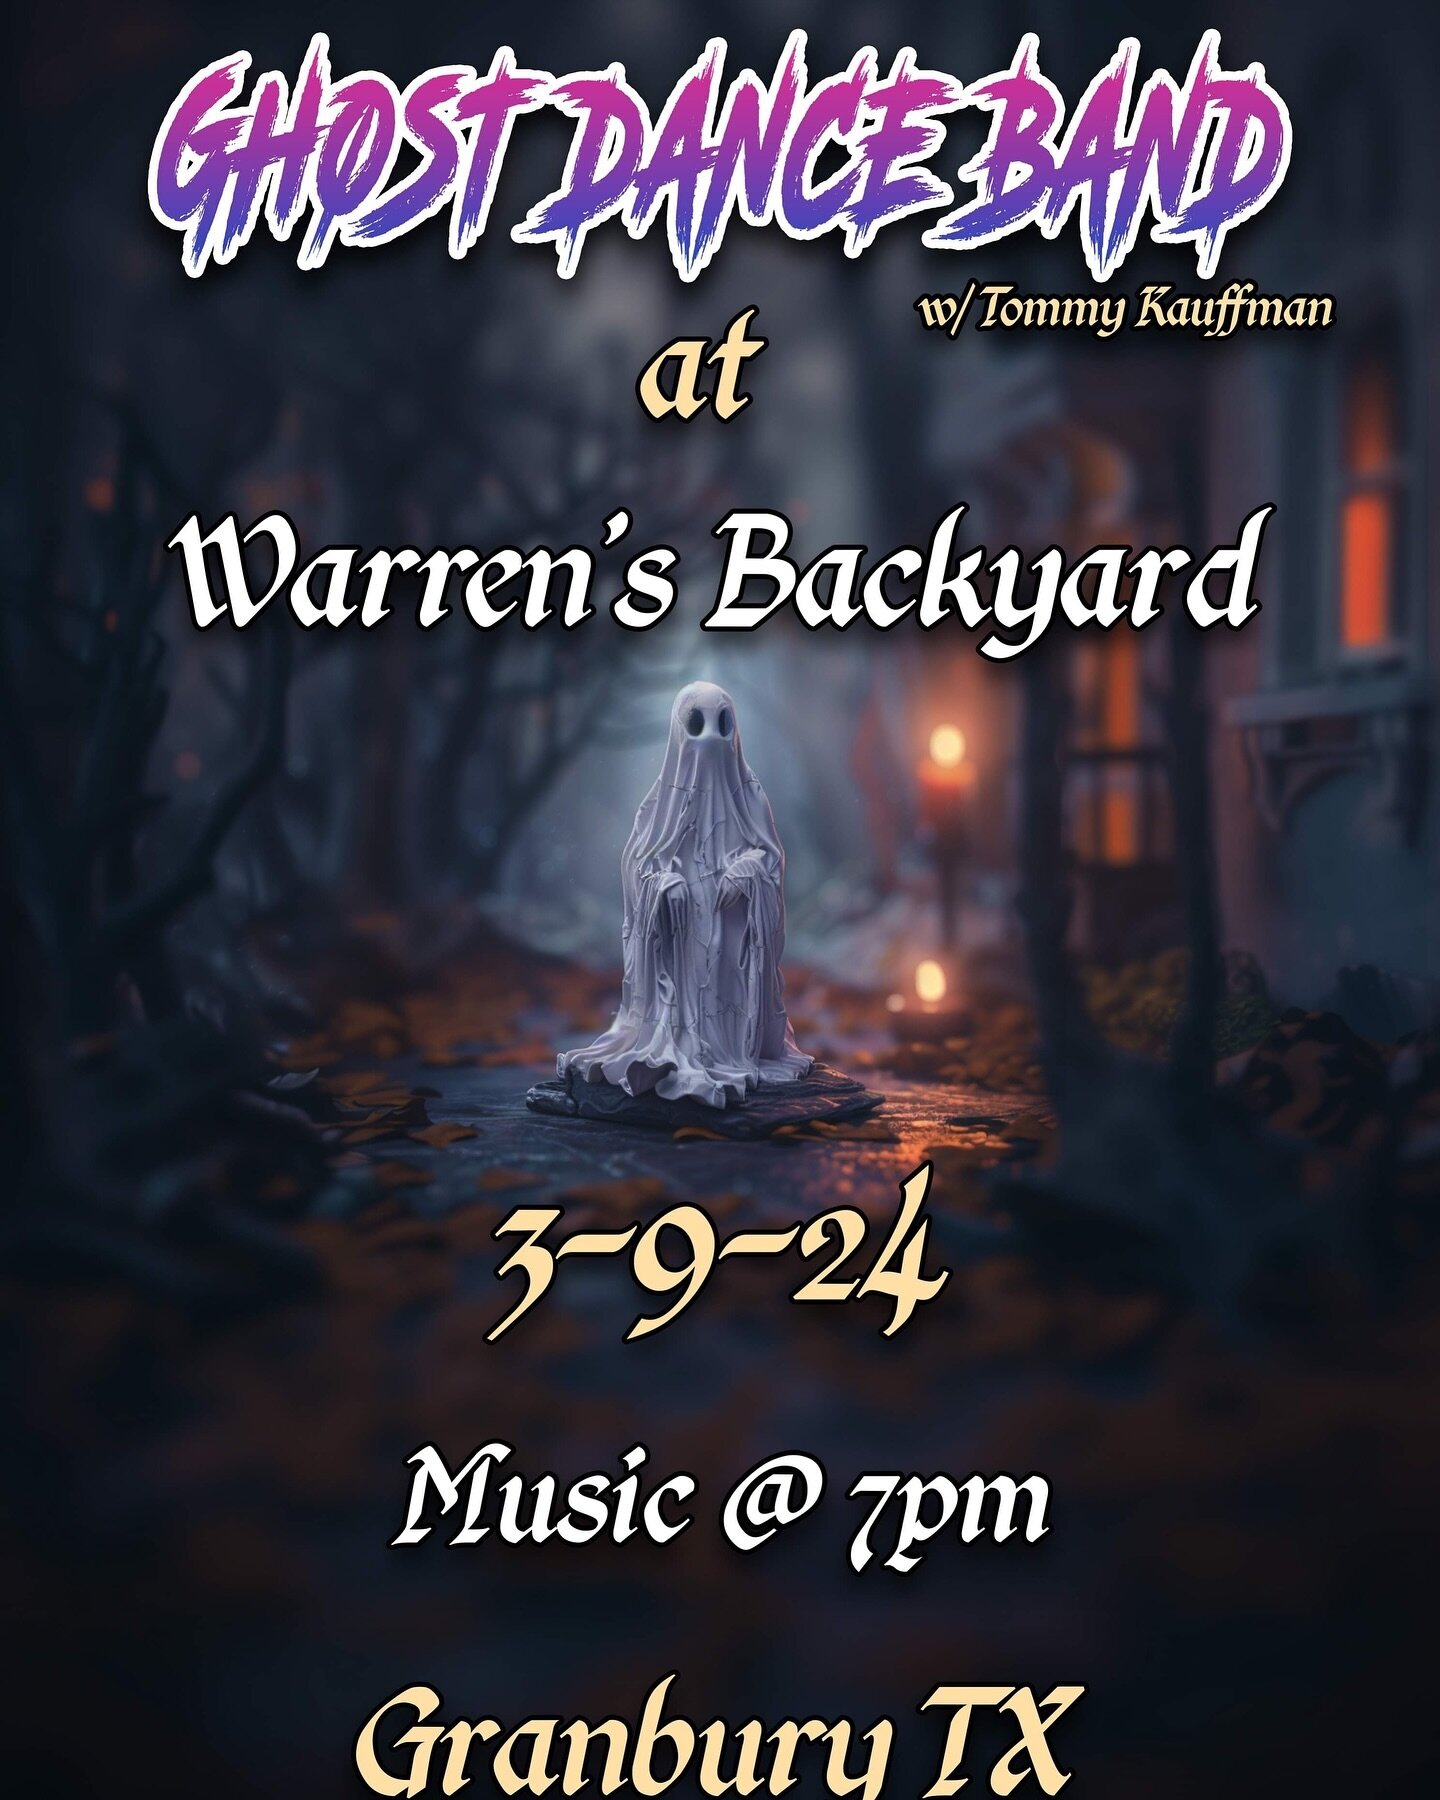 While we are in Waco Friday @backyardwaco supporting @jaret2113, we are ALSO in Granbury Saturday at @warrensbackyard! Our friend @tkauffman1523 is going to kick things off at 7, and we will follow with a BRAND NEW LIGHTSHOW! Come check it out! See y